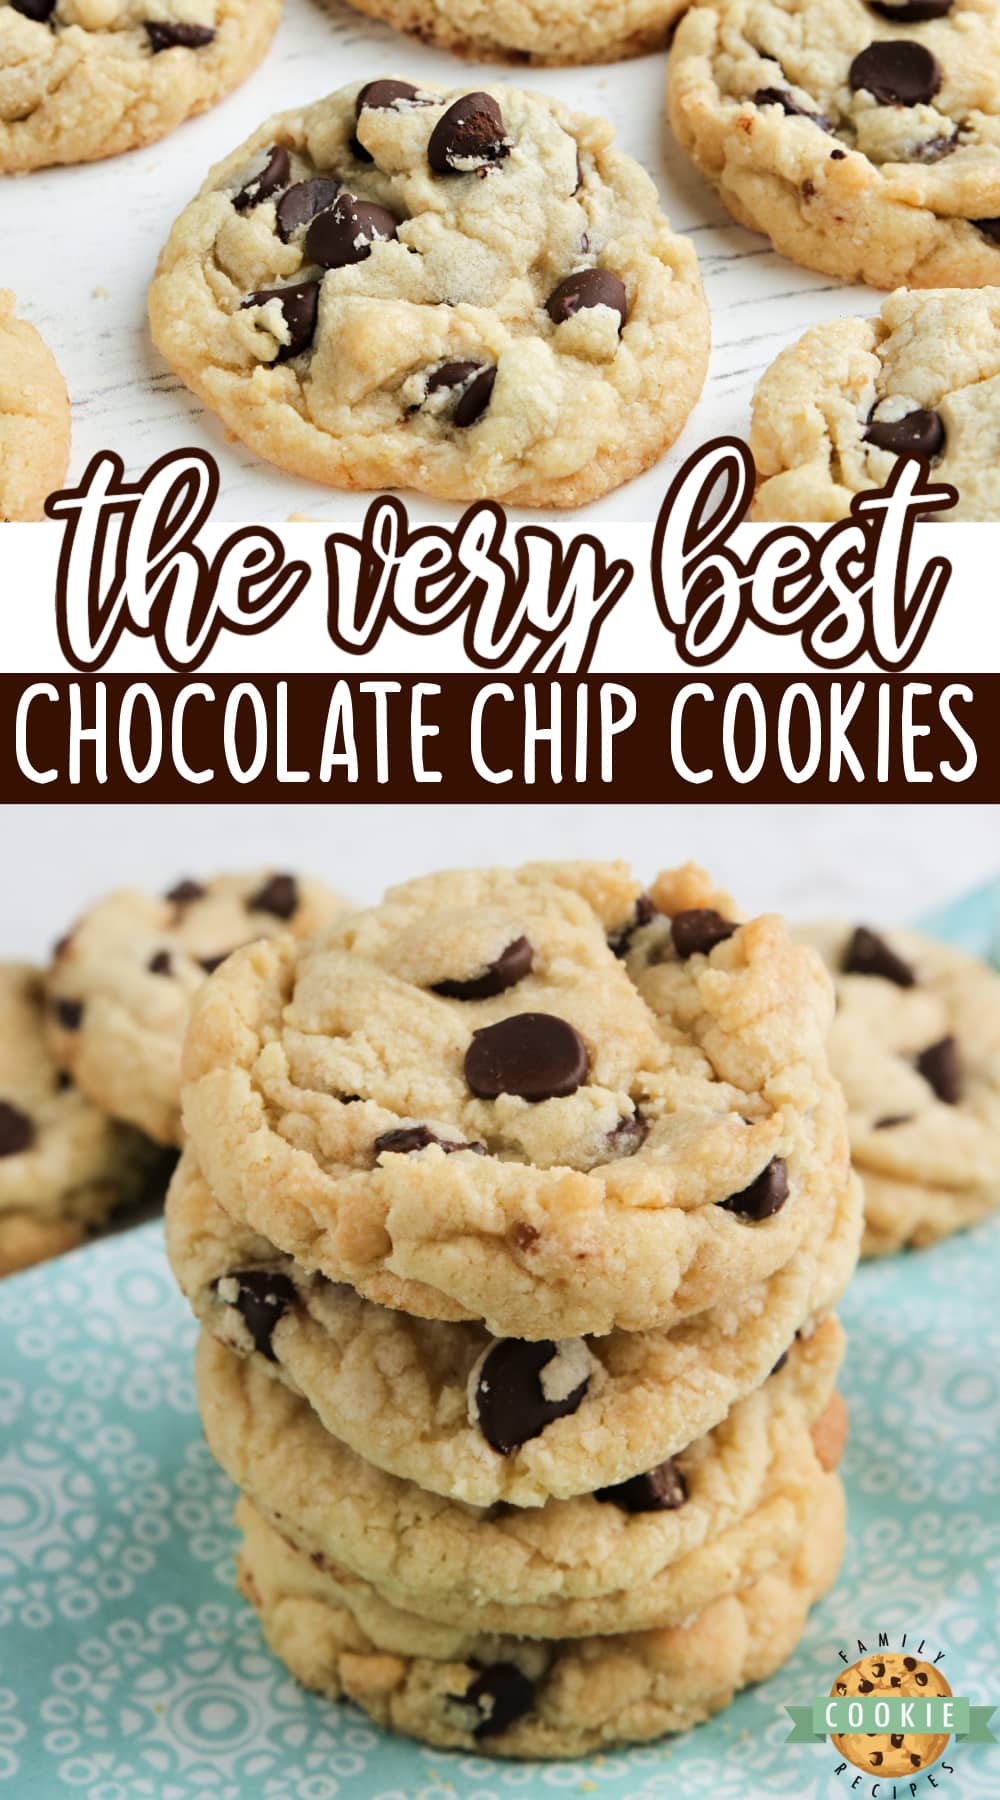 The best Chocolate Chip Cookies are soft, chewy and easy to make too! After trying dozens of different chocolate chip cookie recipes, I decided that I like this one the best!